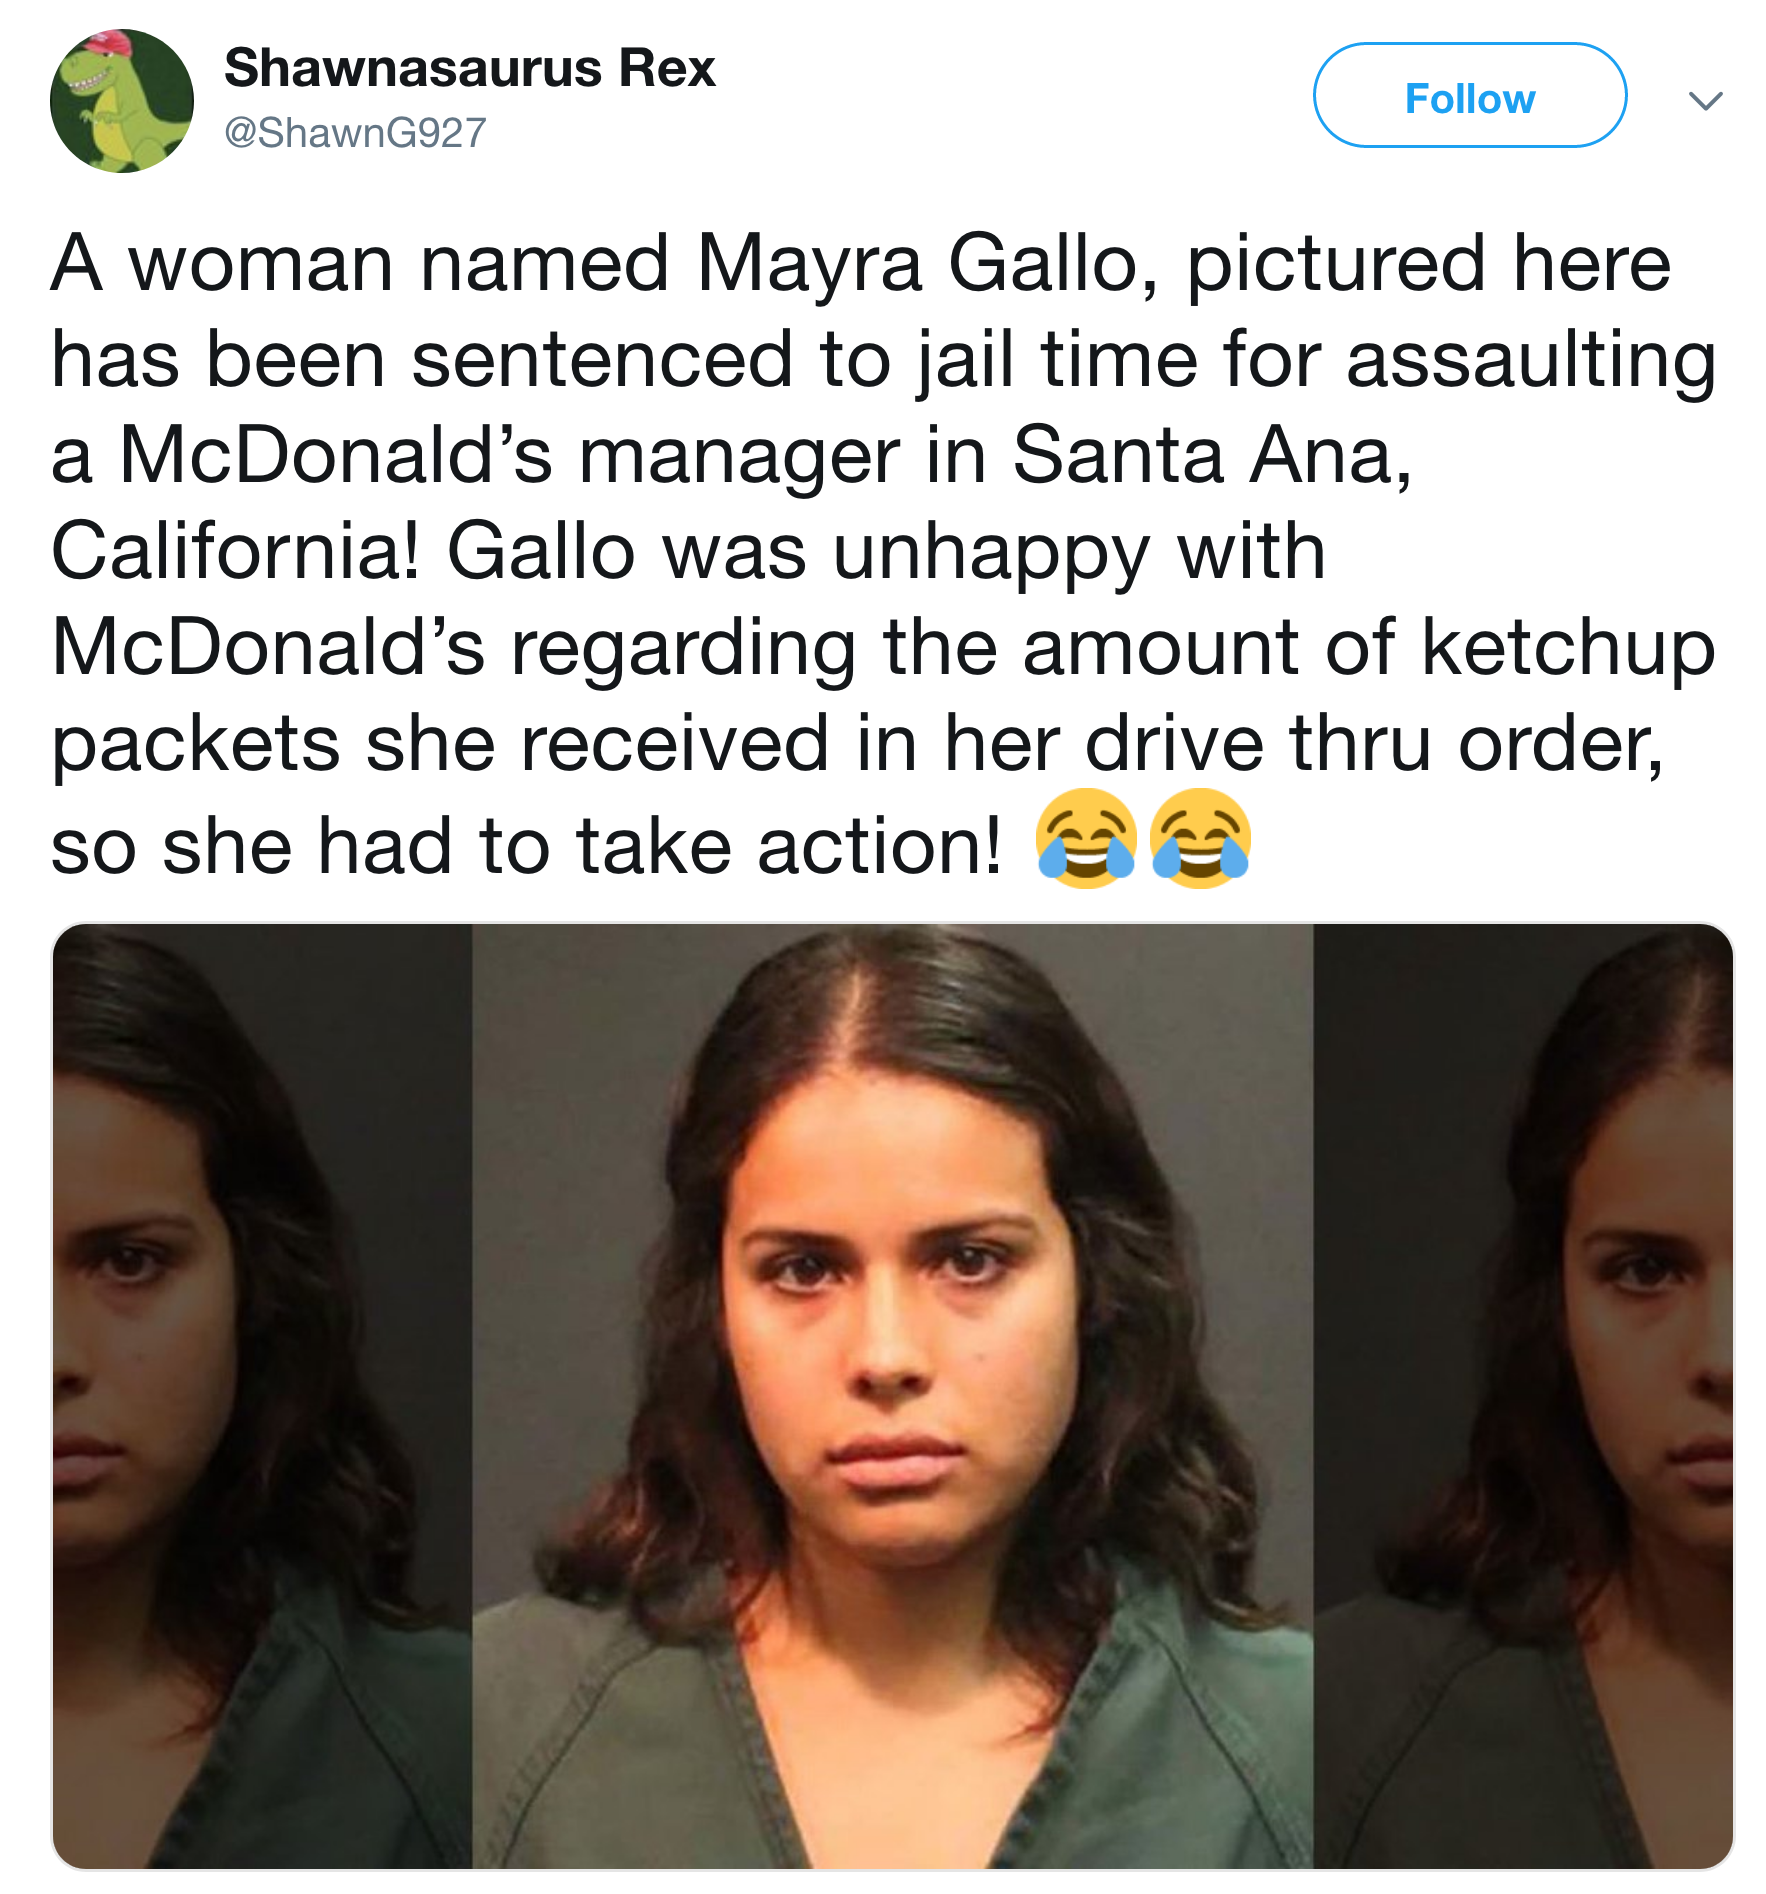 mayra bernice gallo - Shawnasaurus Rex ShawnG927 A woman named Mayra Gallo, pictured here has been sentenced to jail time for assaulting a McDonald's manager in Santa Ana, California! Gallo was unhappy with McDonald's regarding the amount of ketchup packe